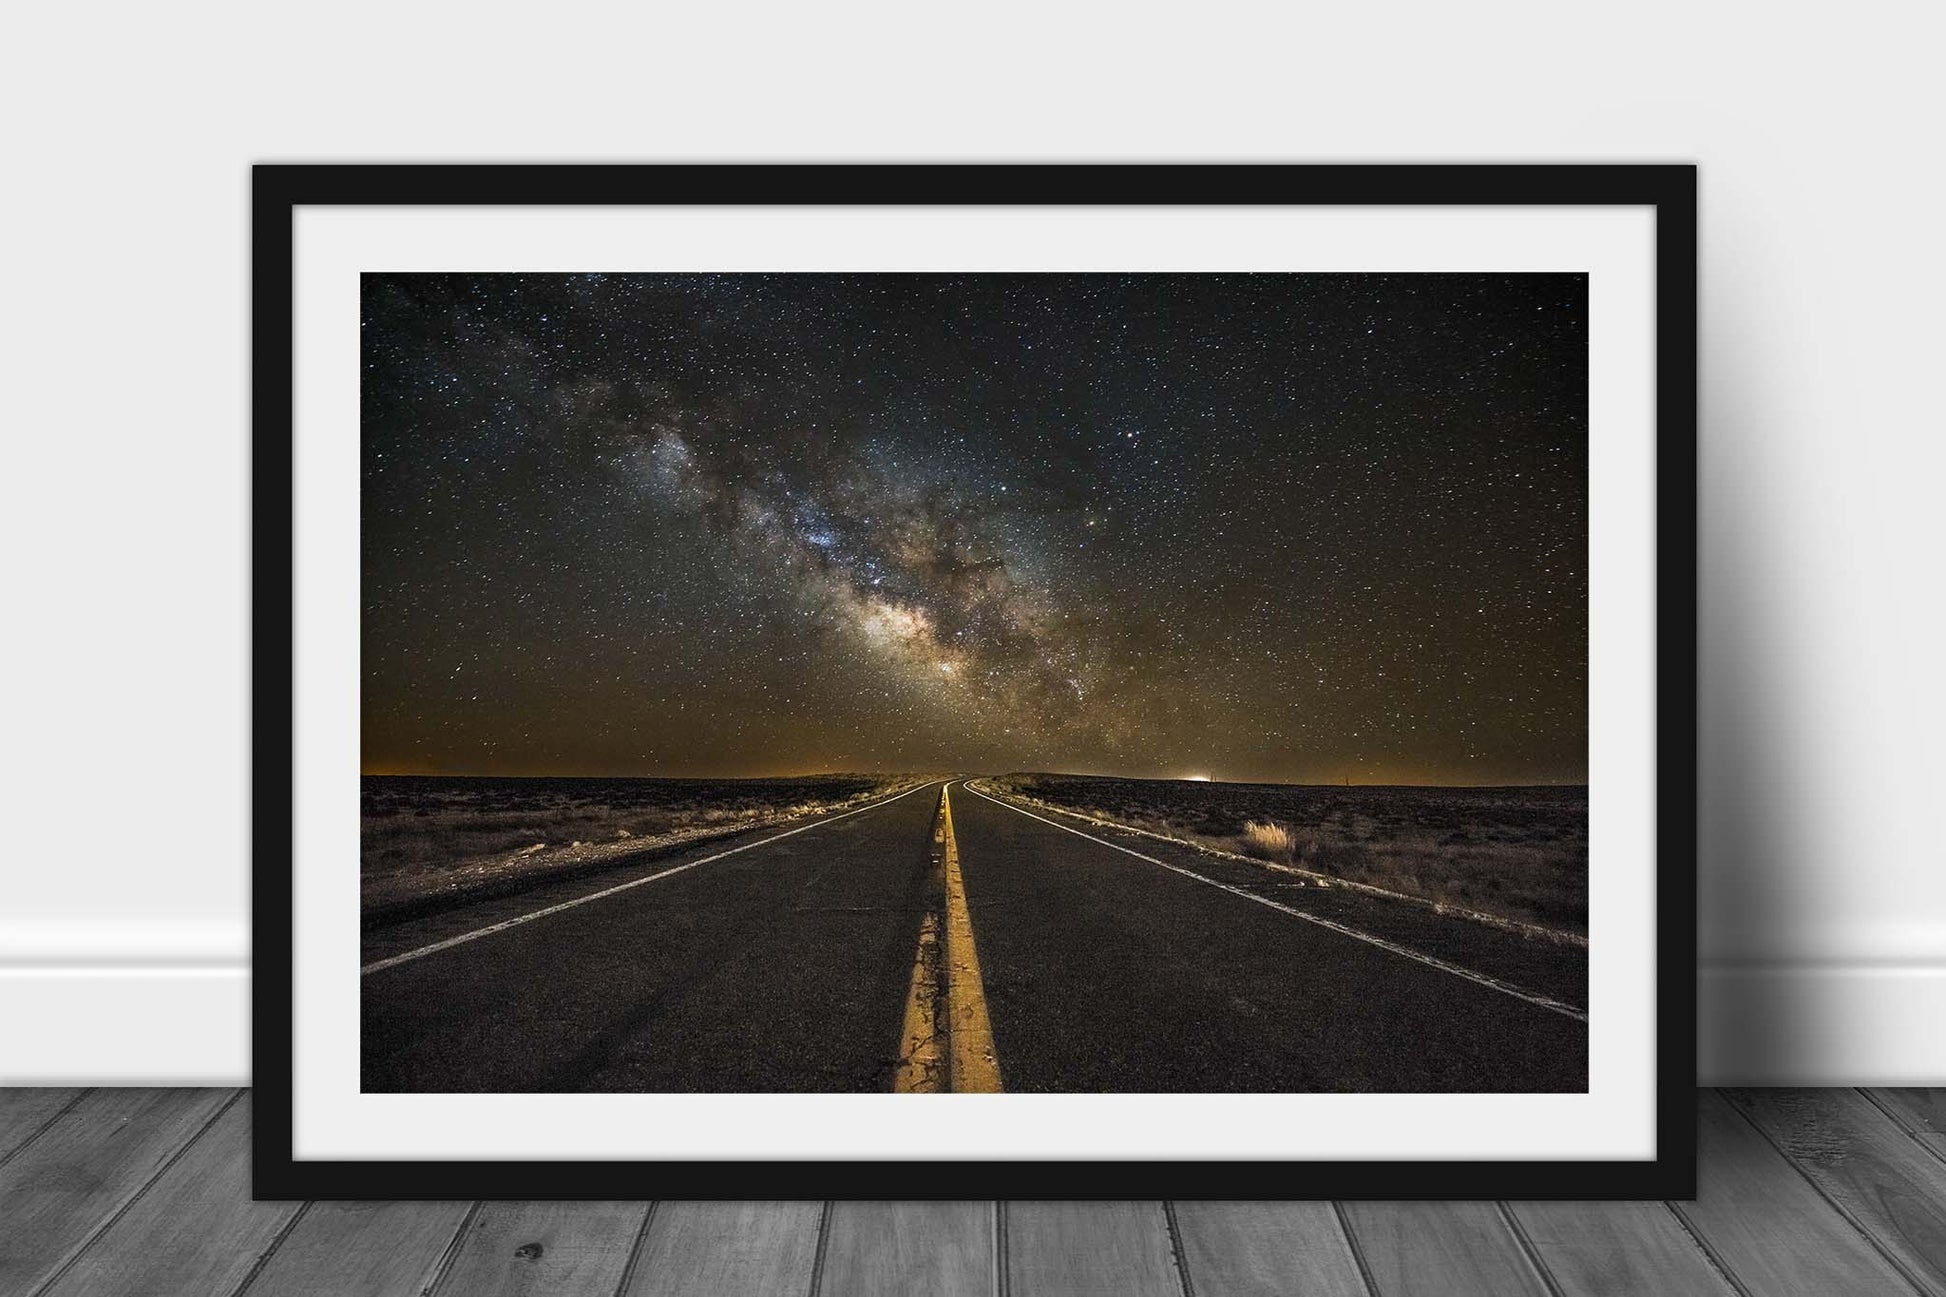 Framed wanderlust print with optional mat of a highway leading to the Milky Way rising above the horizon on a starry night in the Arizona desert by Sean Ramsey of Southern Plains Photography.